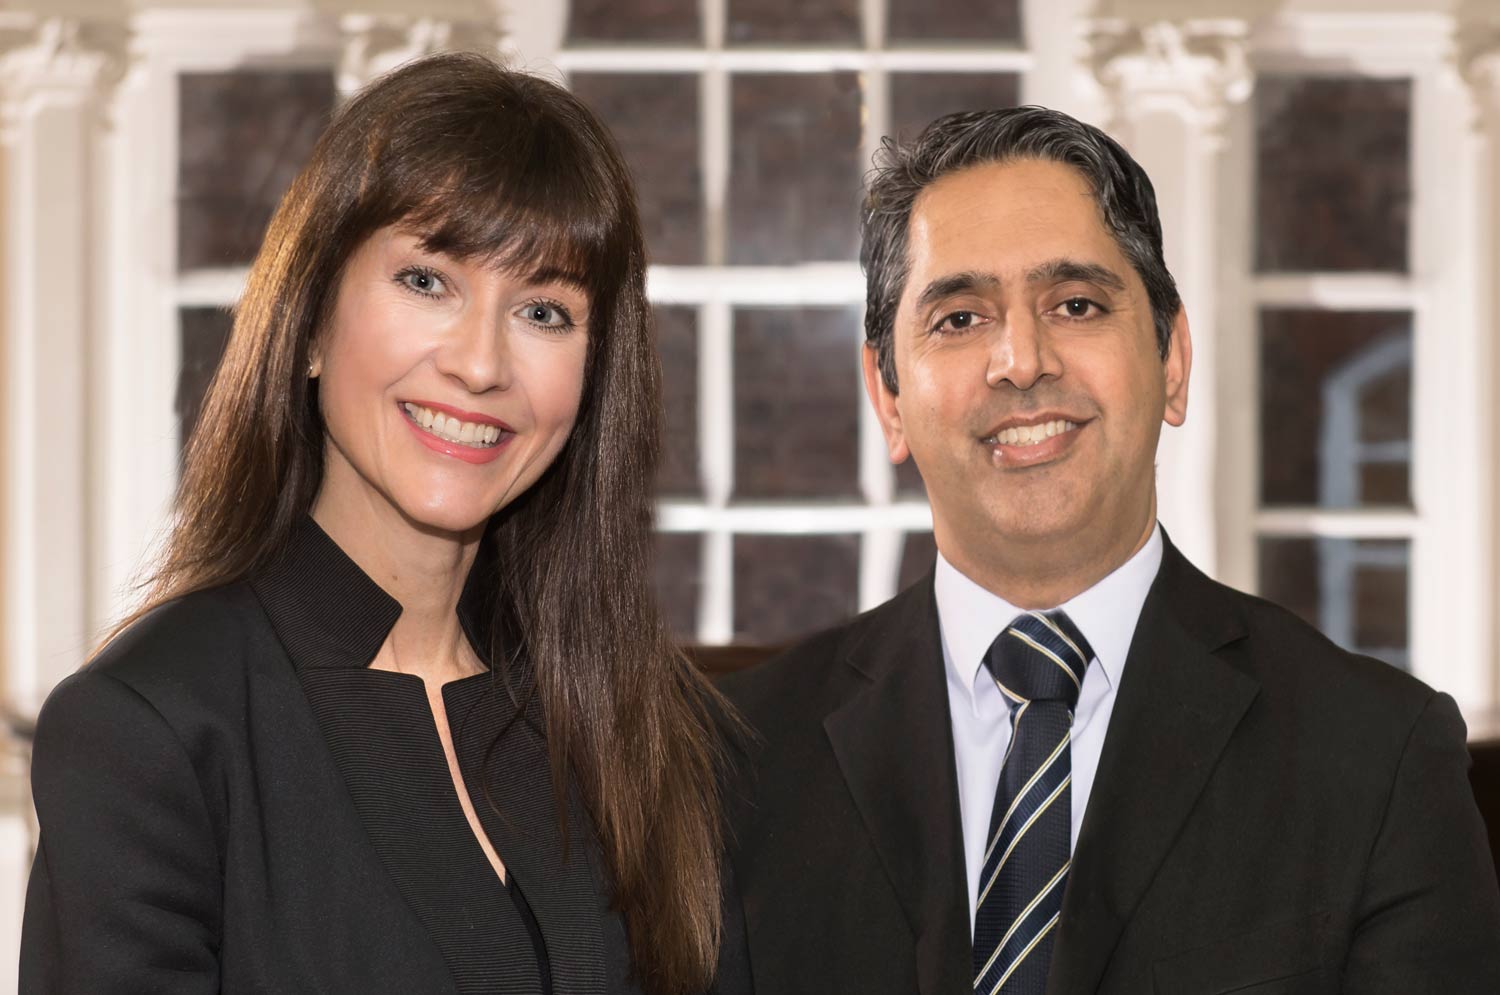 Barry Khan and Hilary Irving, managing director and director of First North Law